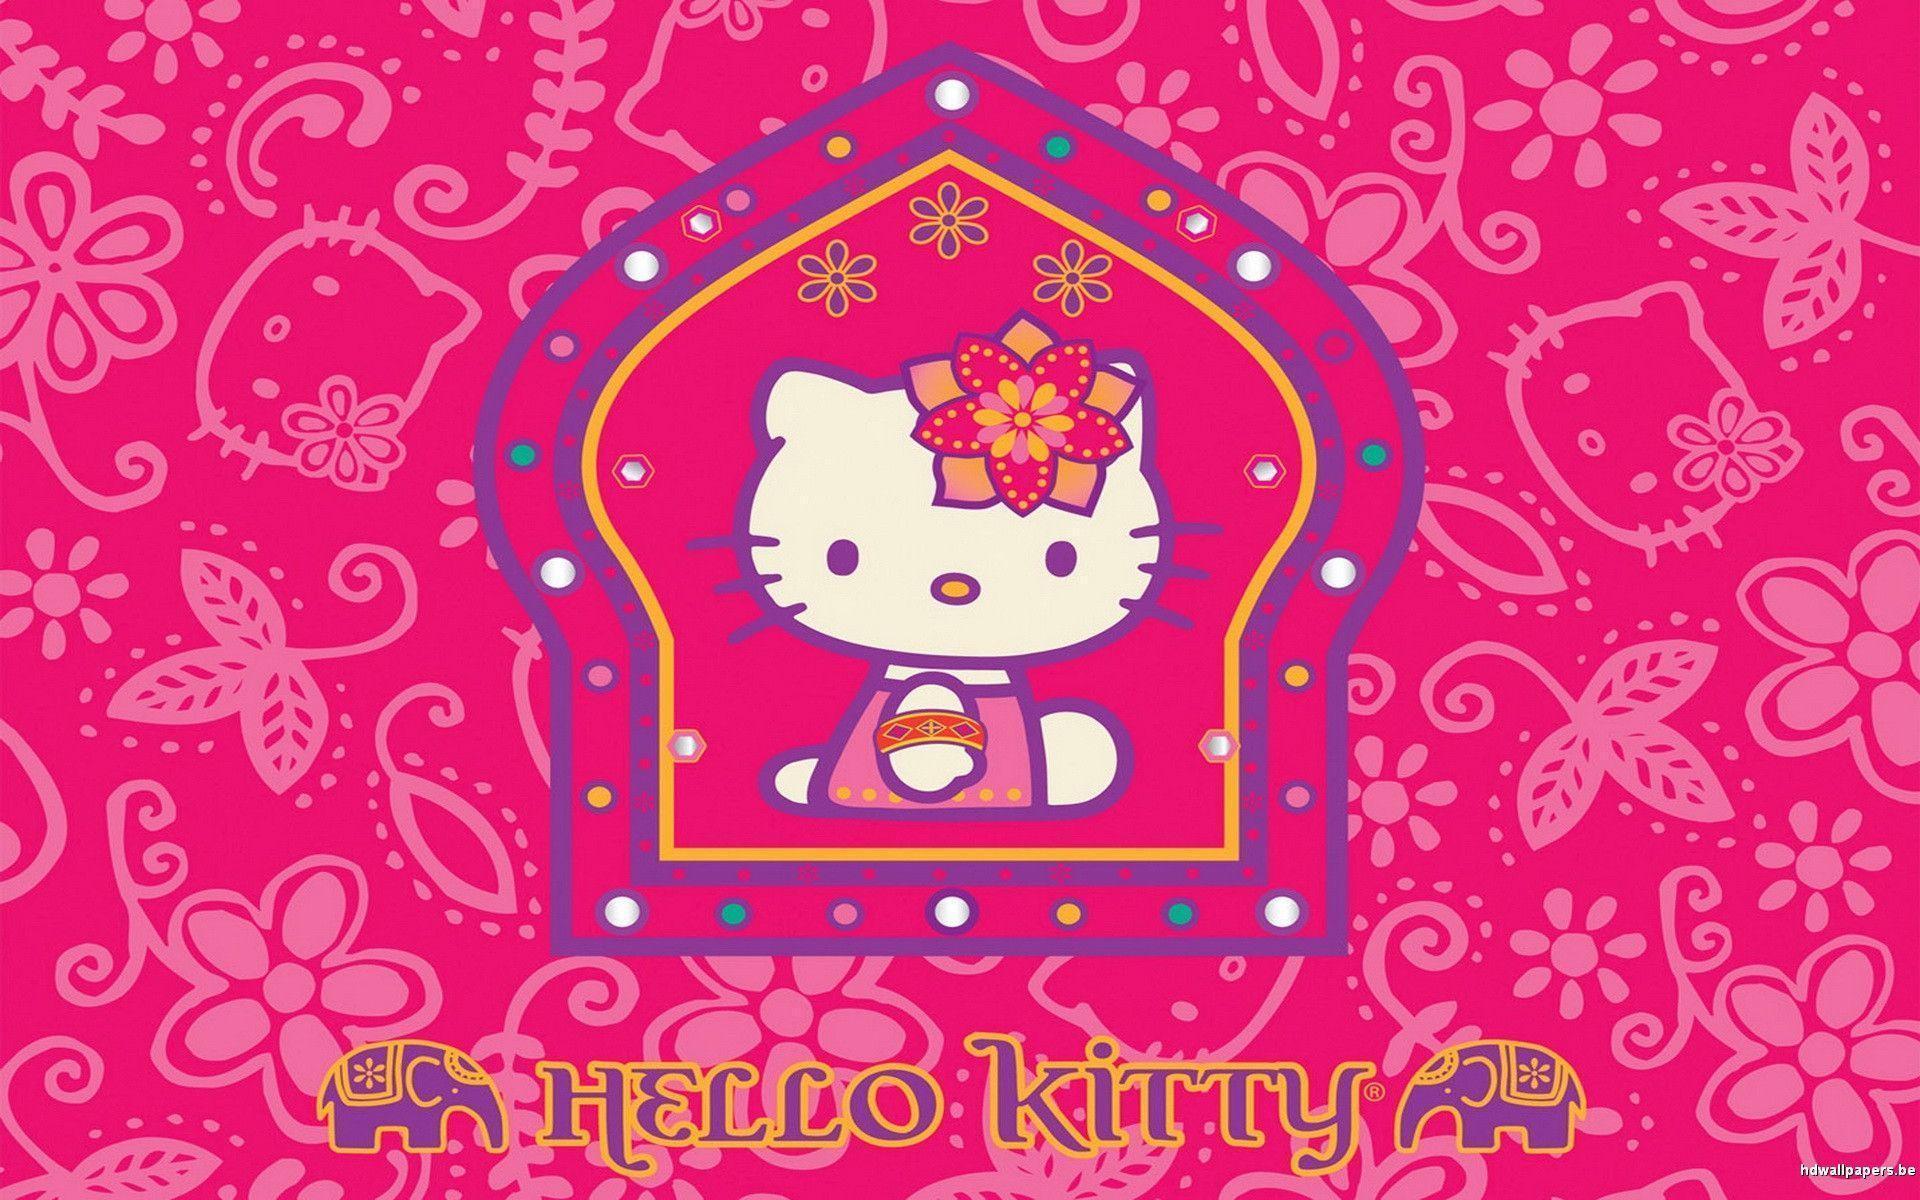 HD Wallpapers Hello Kitty - Wallpaper Cave